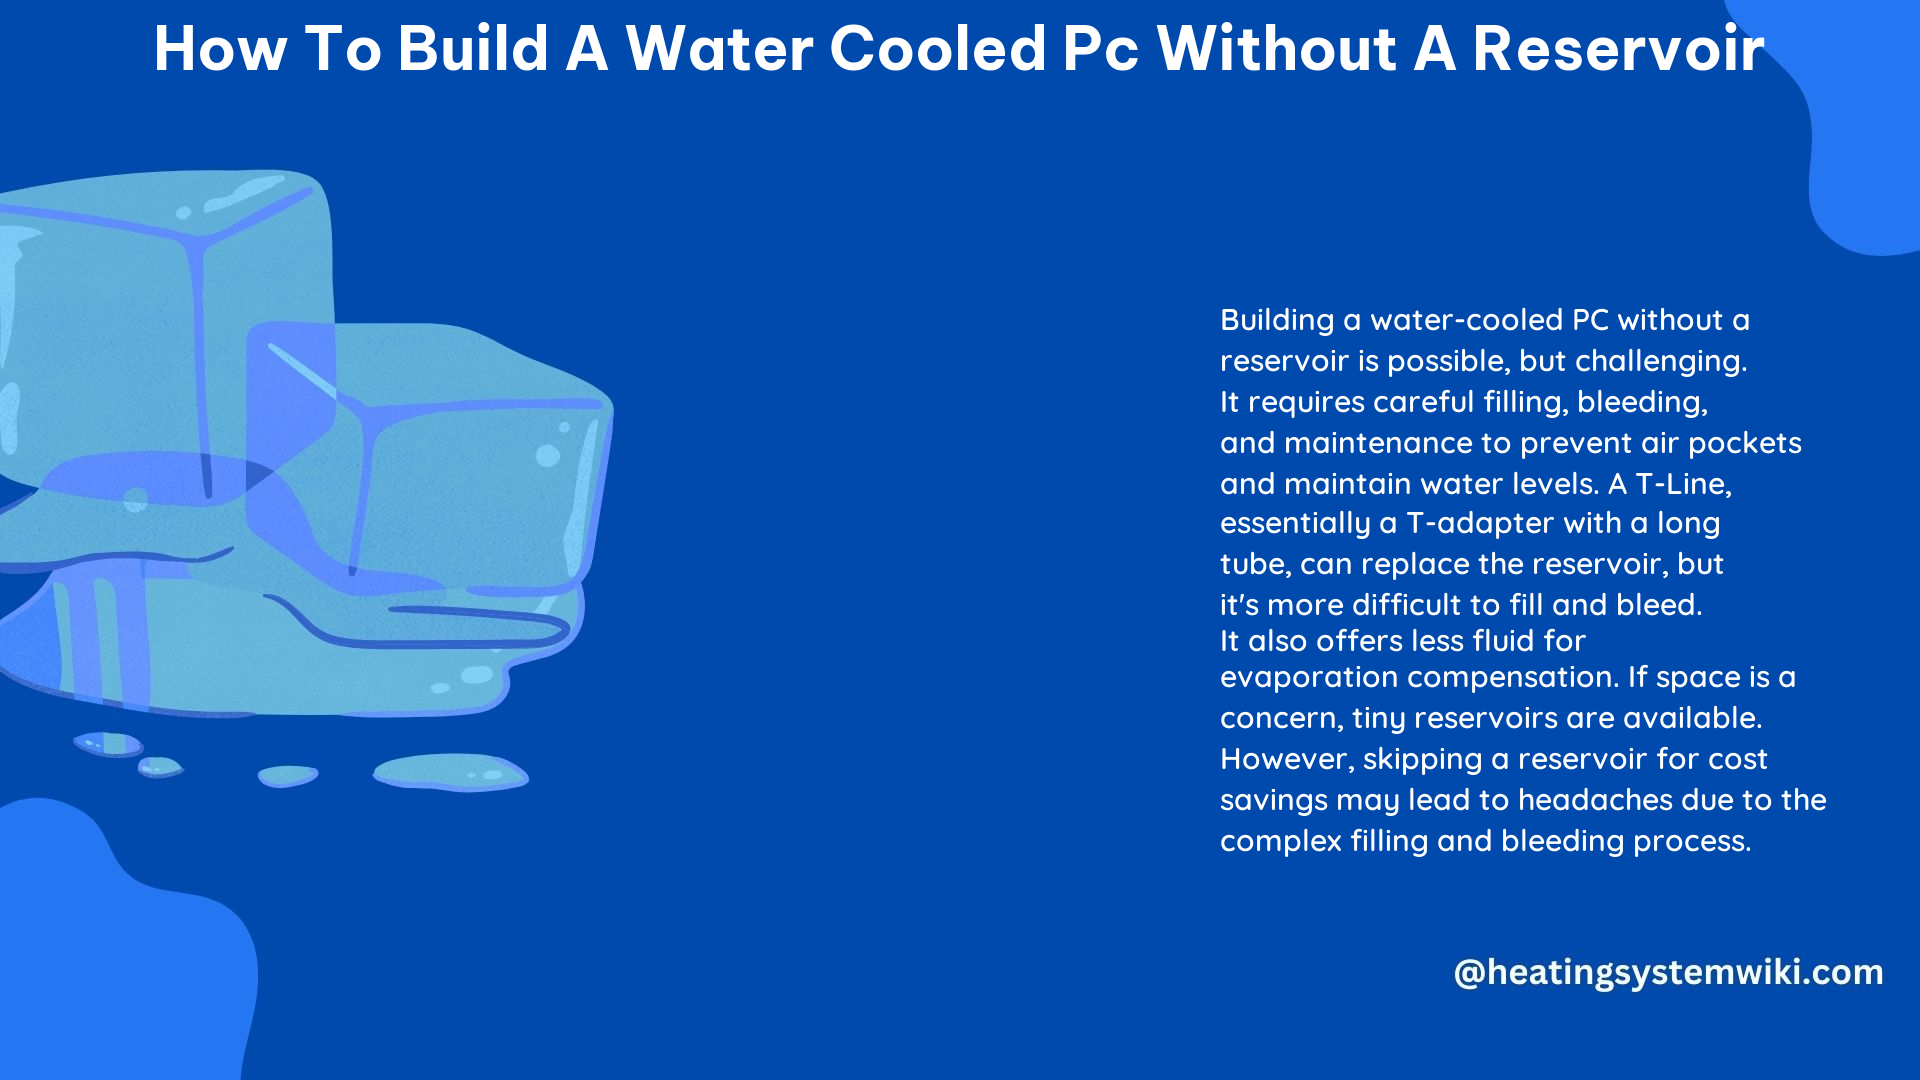 How to Build a Water Cooled PC Without a Reservoir